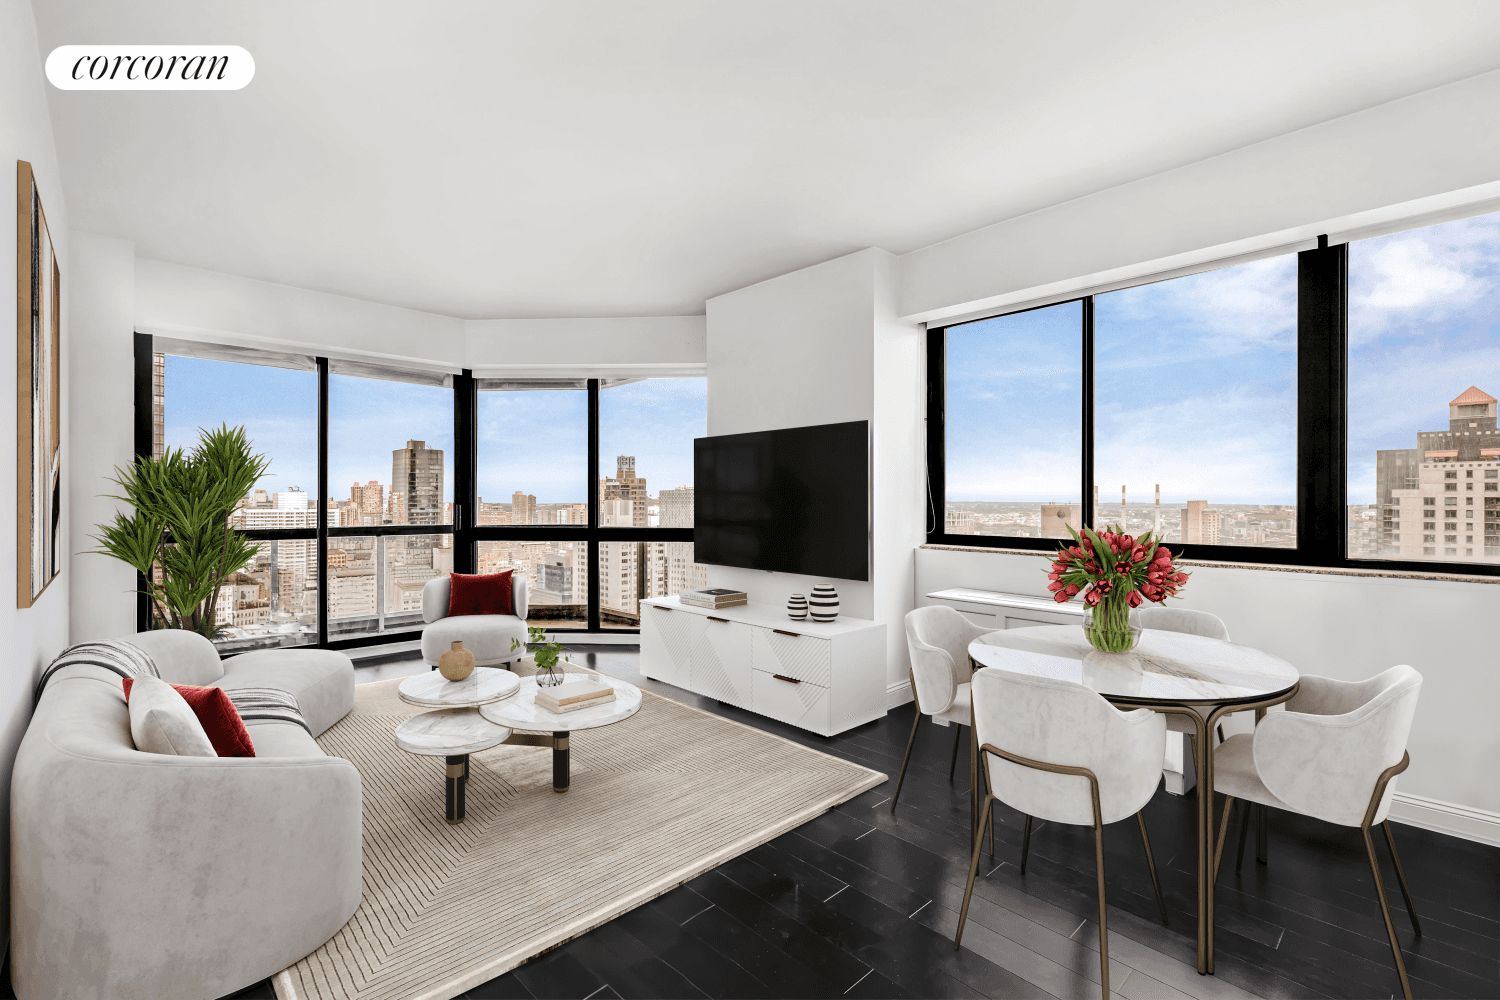 Welcome to this incredible 1 bedroom residence in the Savoy, located in the heart of the Upper East Side.